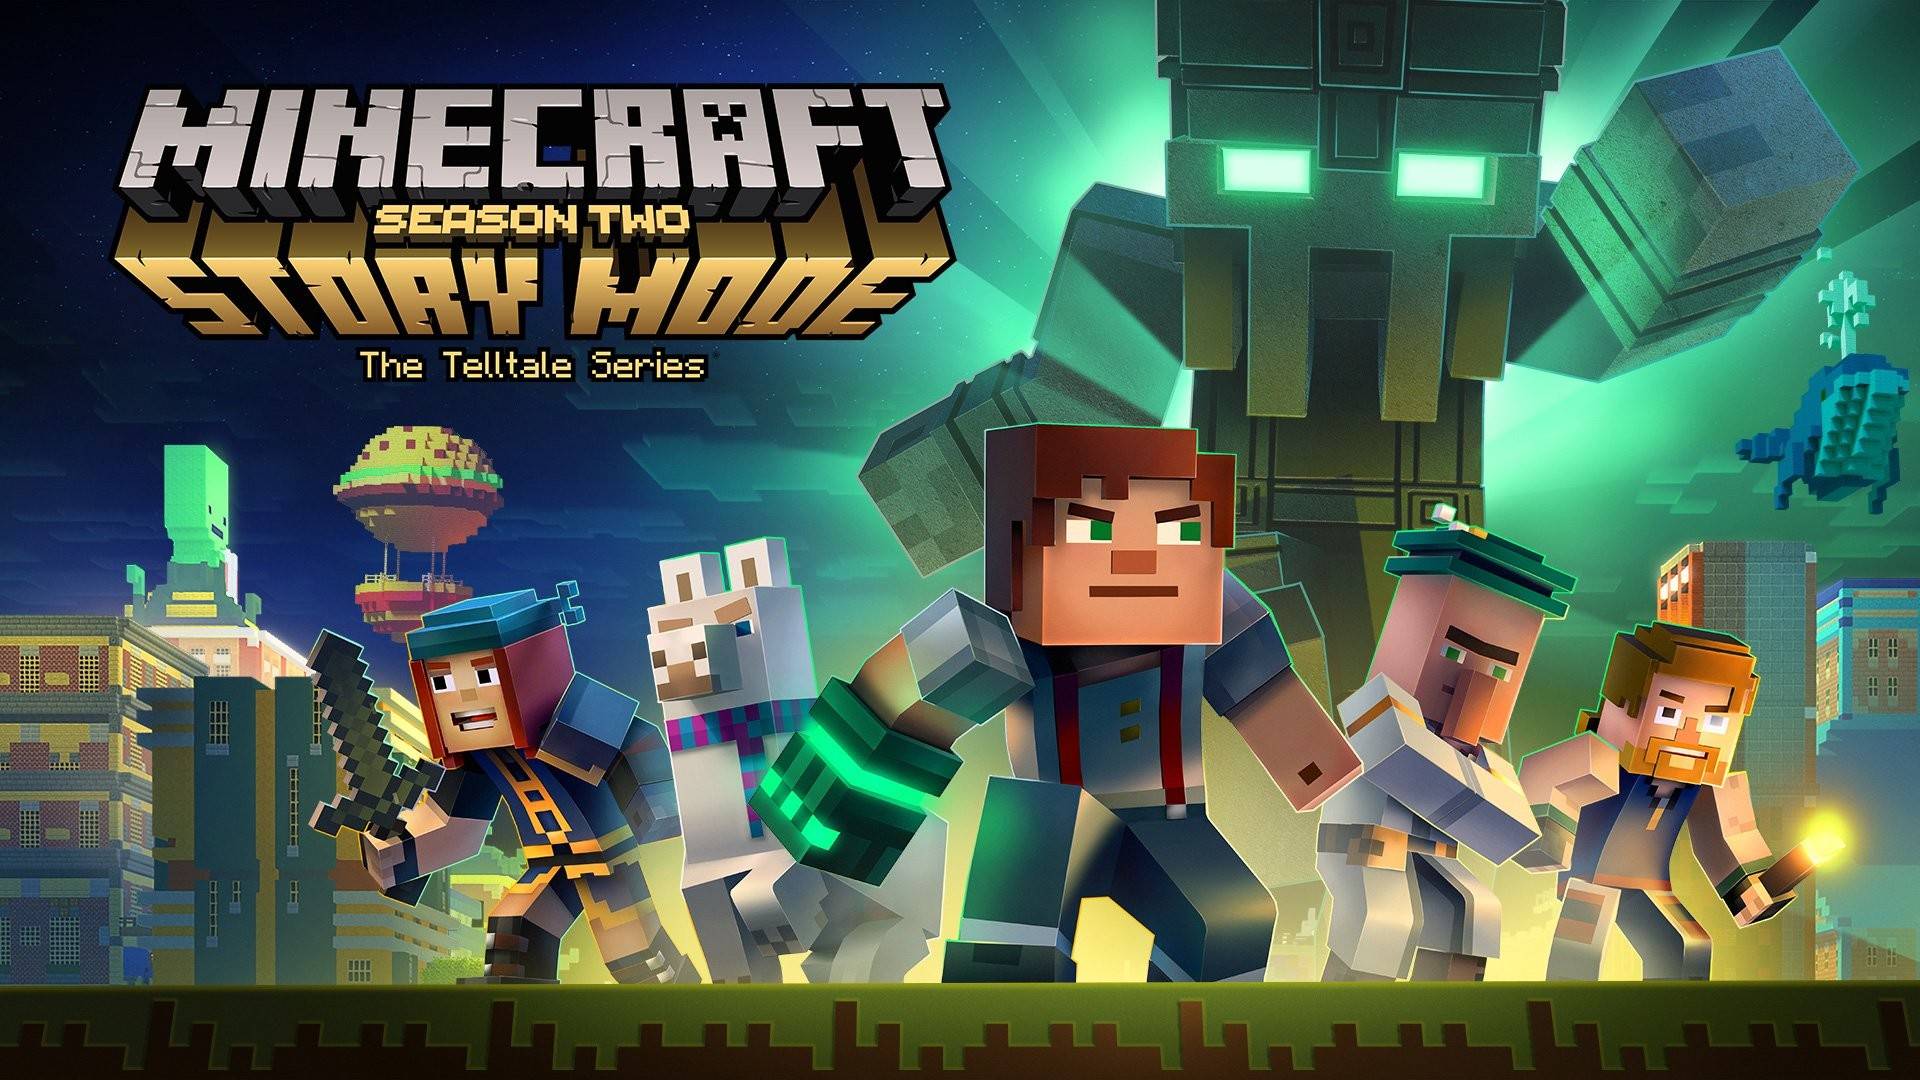 Minecraft: Story Mode challenges the way Telltale Games builds its stories